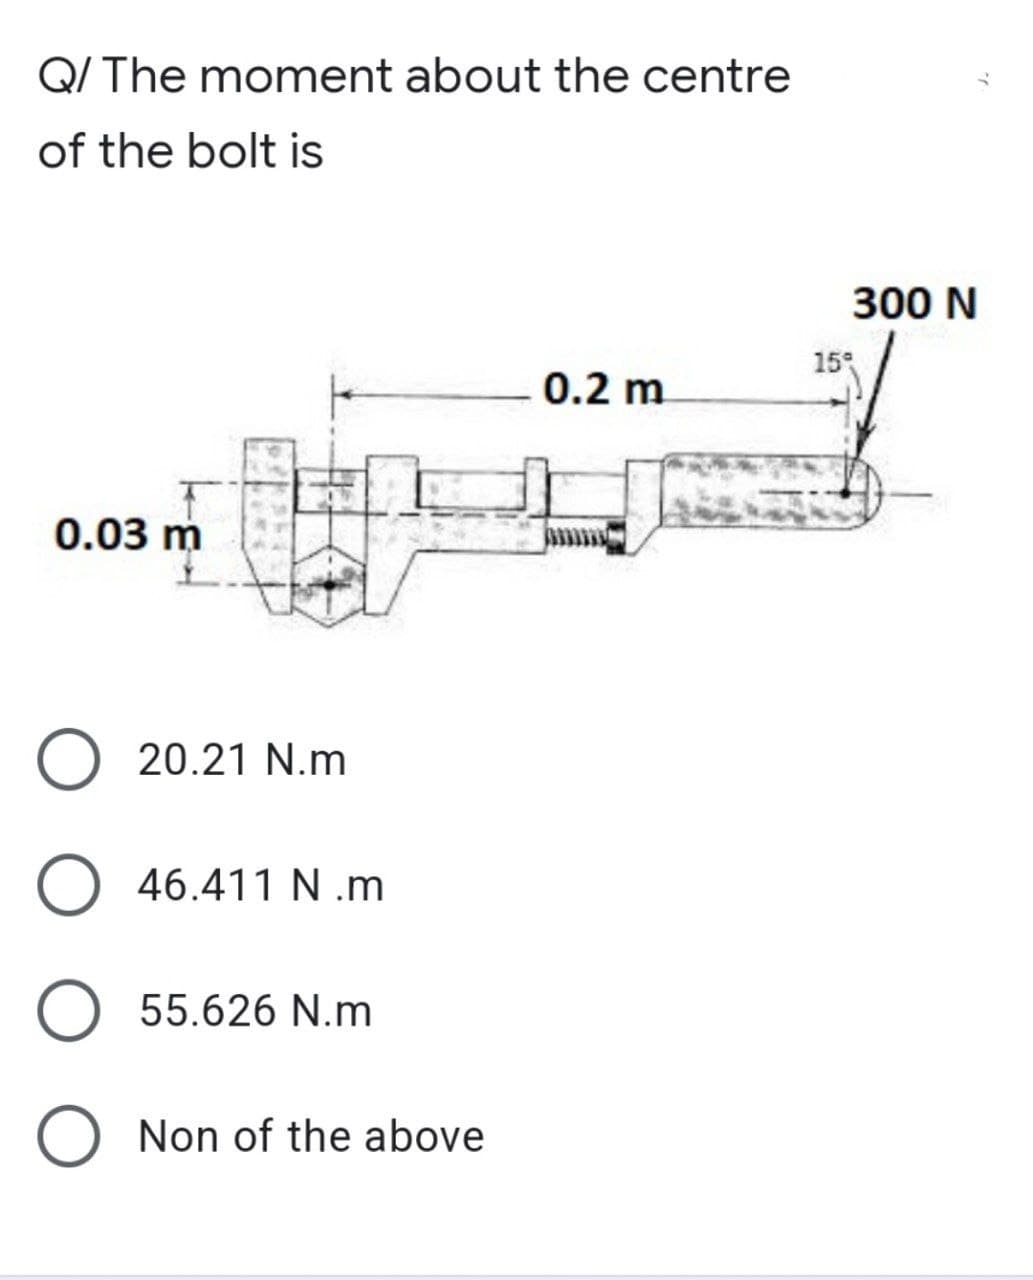 Q/ The moment about the centre
of the bolt is
0.2 m
0.03 m
O 20.21 N.m
O 46.411 N.m
O 55.626 N.m
Non of the above
300 N
15%